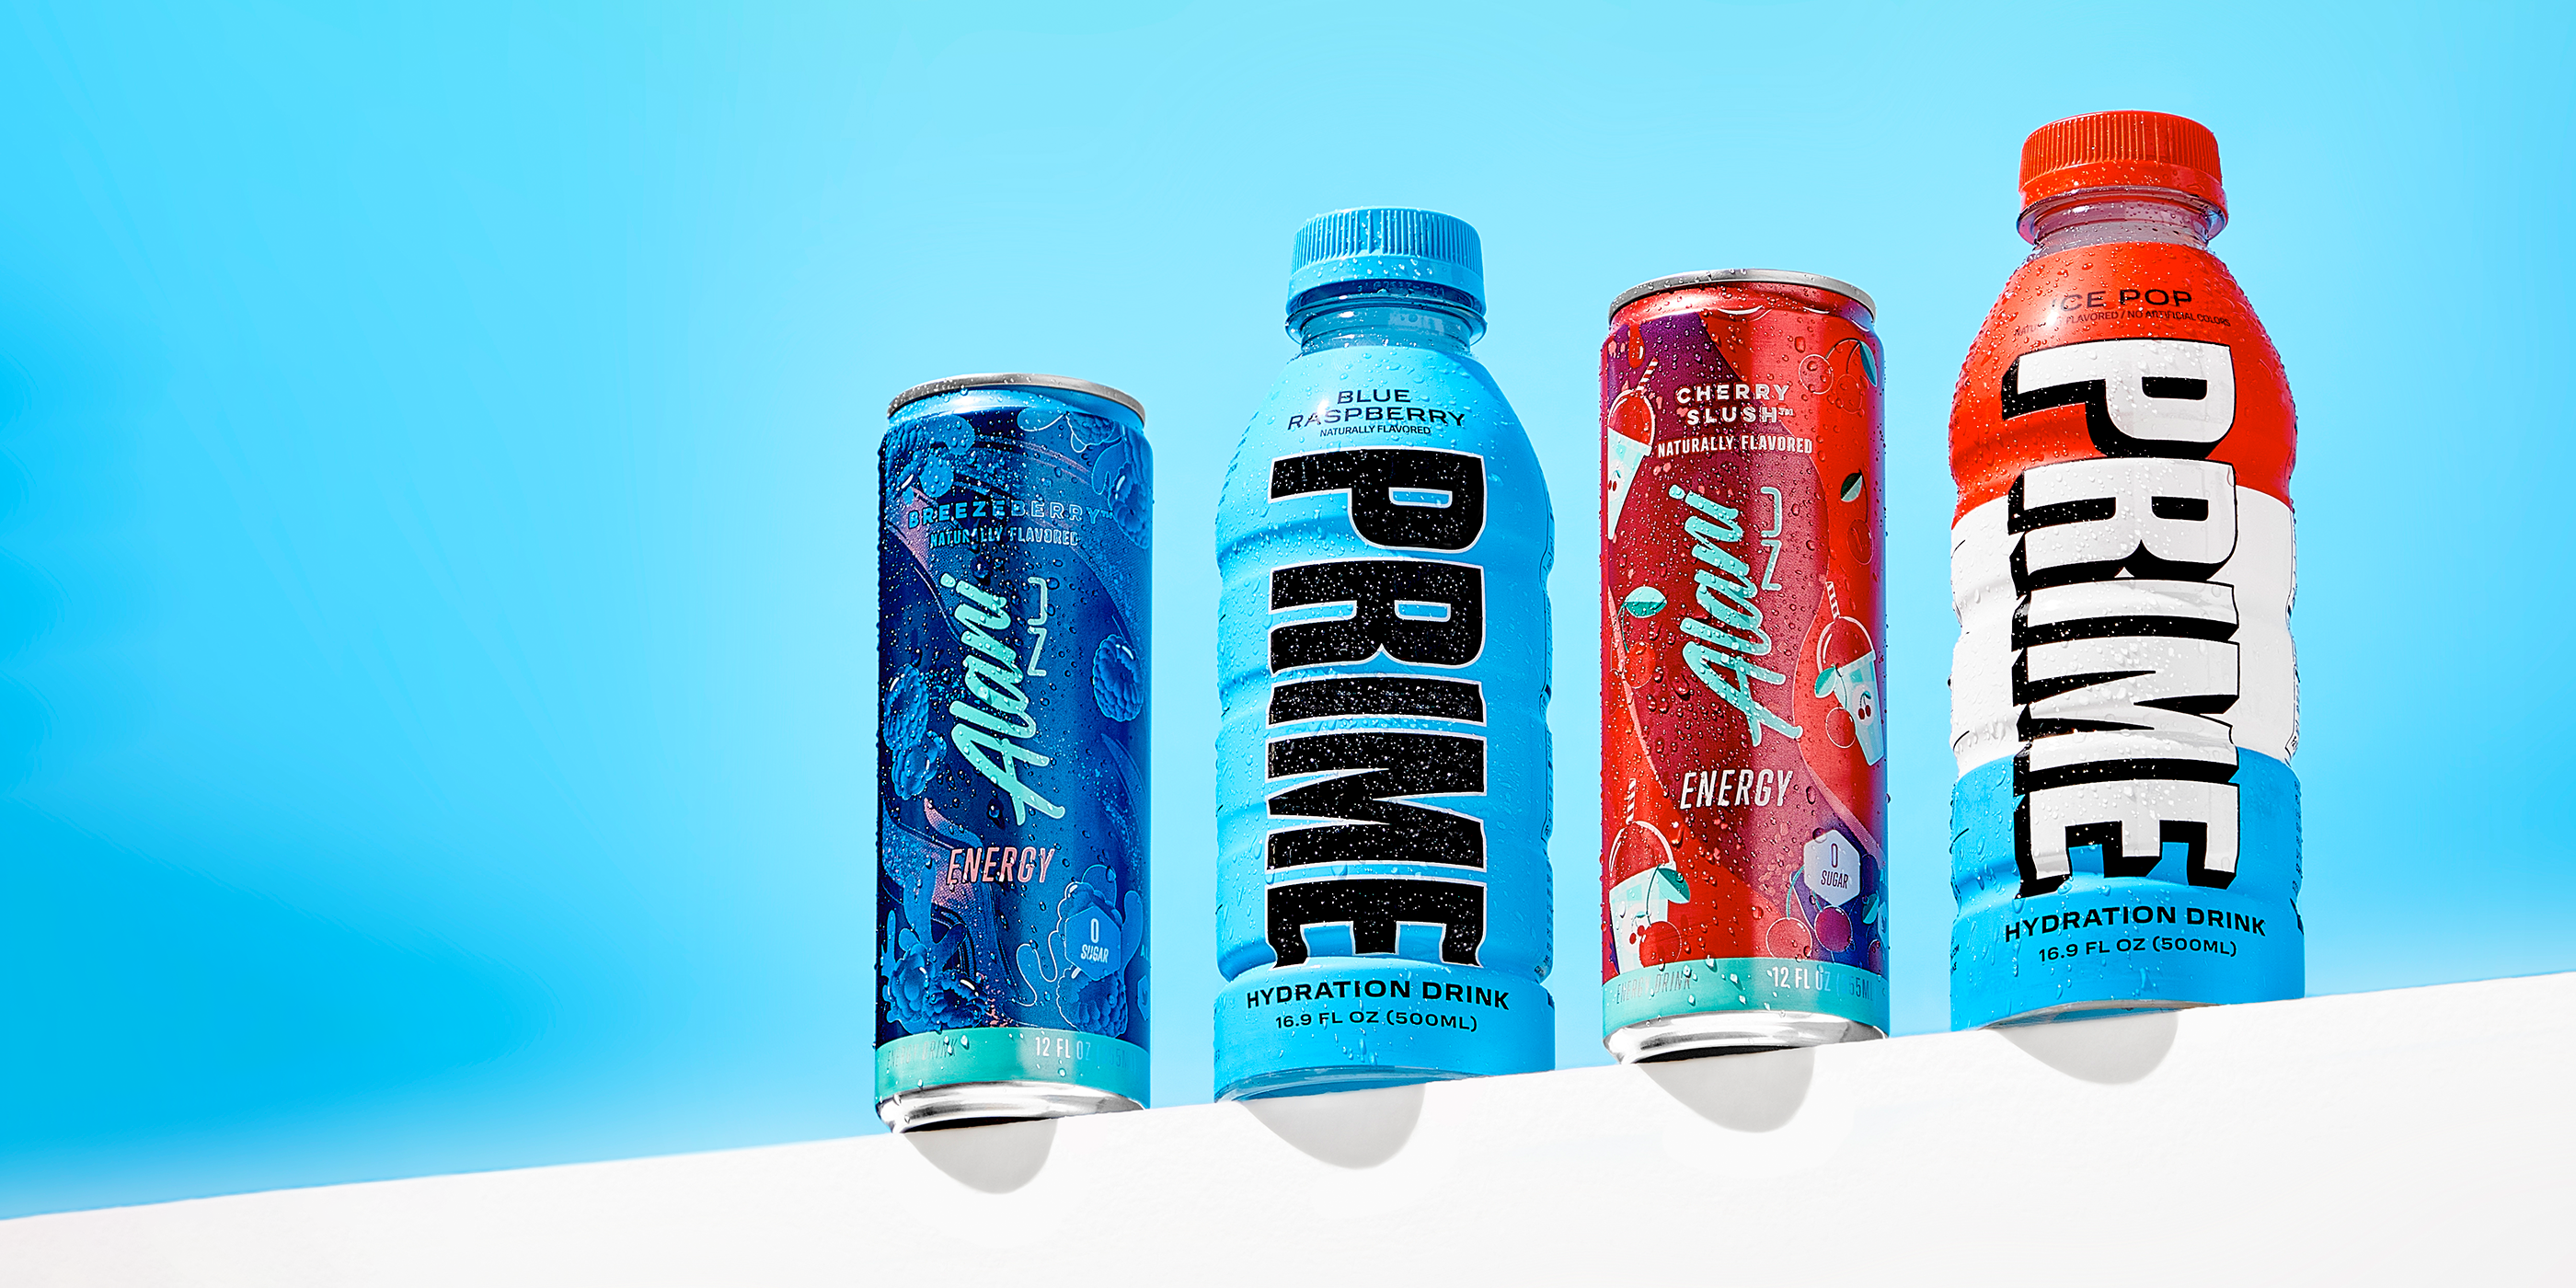  Displayed side by side are four refreshment options: a Breezberry energy drink, Prime Hydration in Blue Raspberry, a Cherry Slush-flavored energy drink, and Prime Hydration featuring the Rocket Pop flavor.